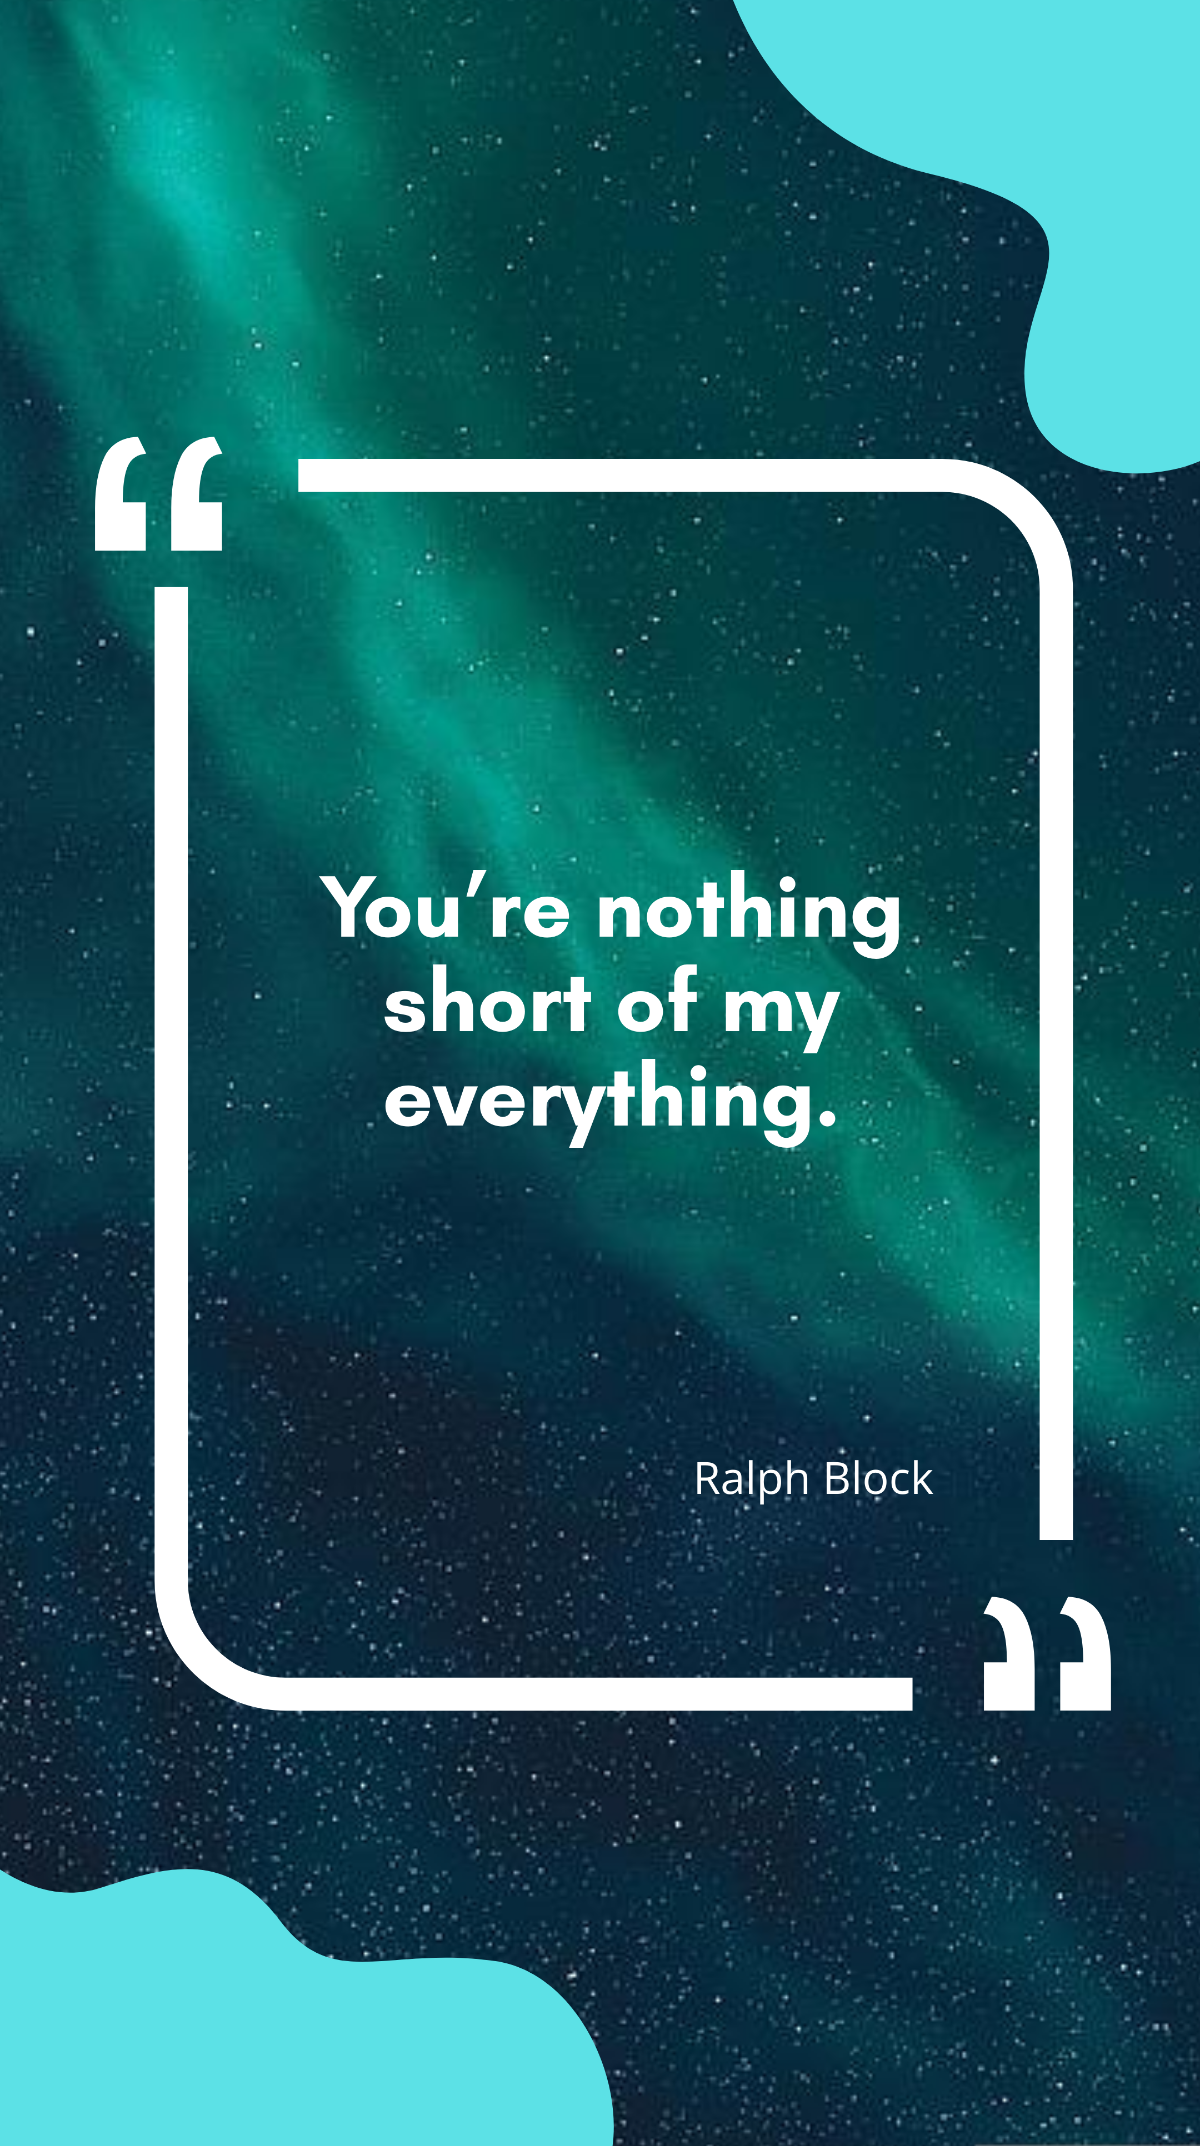 Ralph Block - “You’re nothing short of my everything.” Template